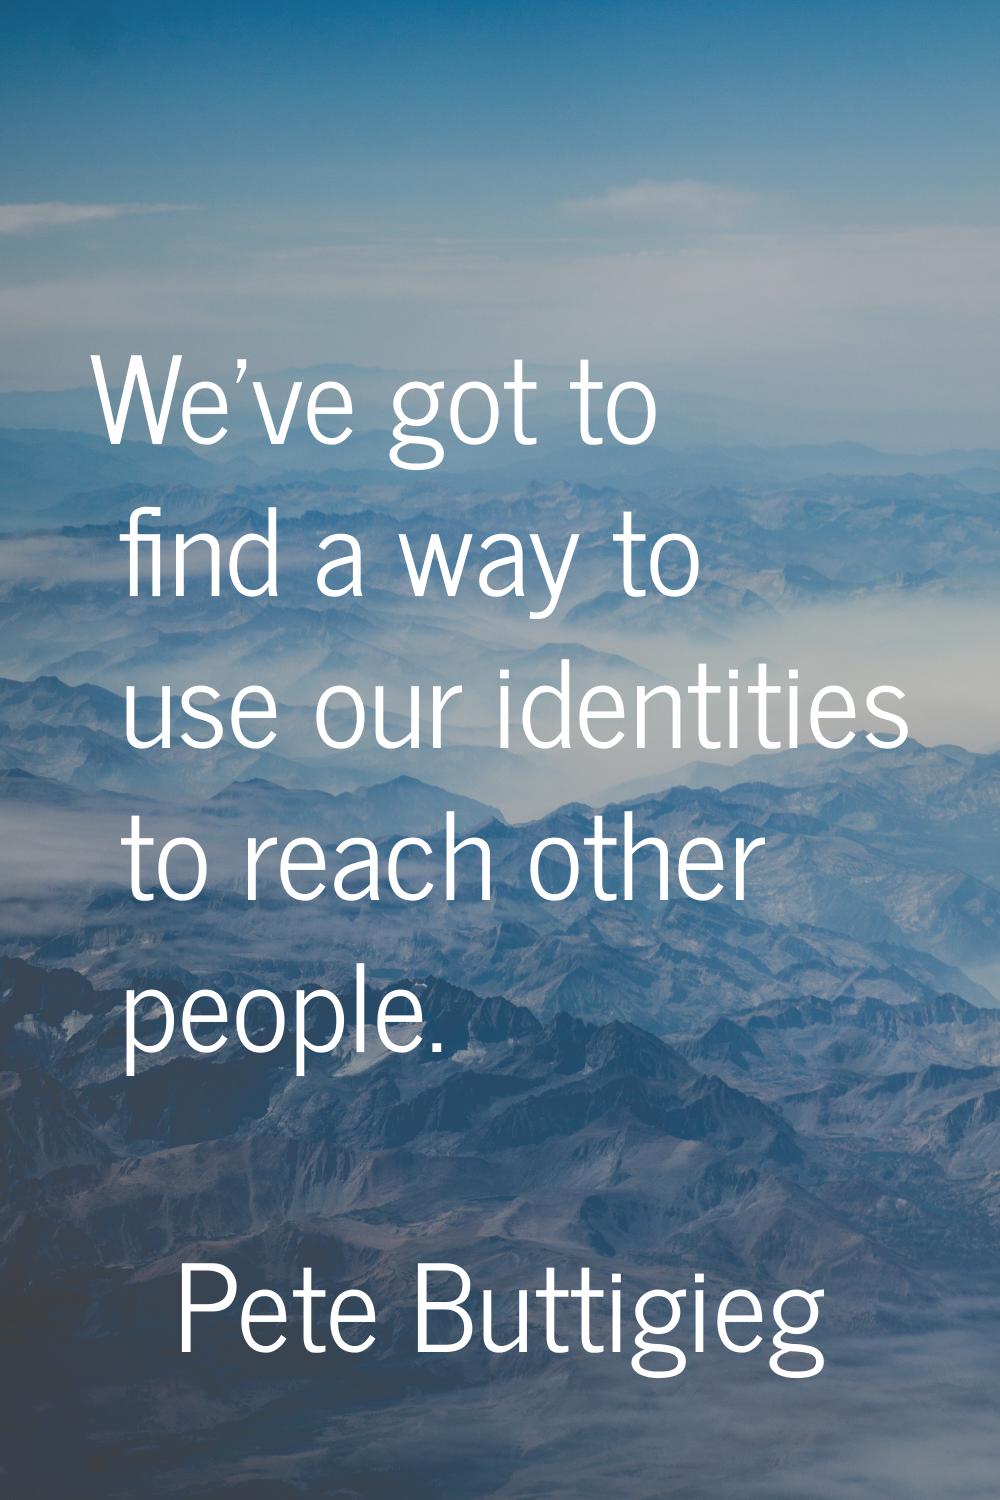 We've got to find a way to use our identities to reach other people.